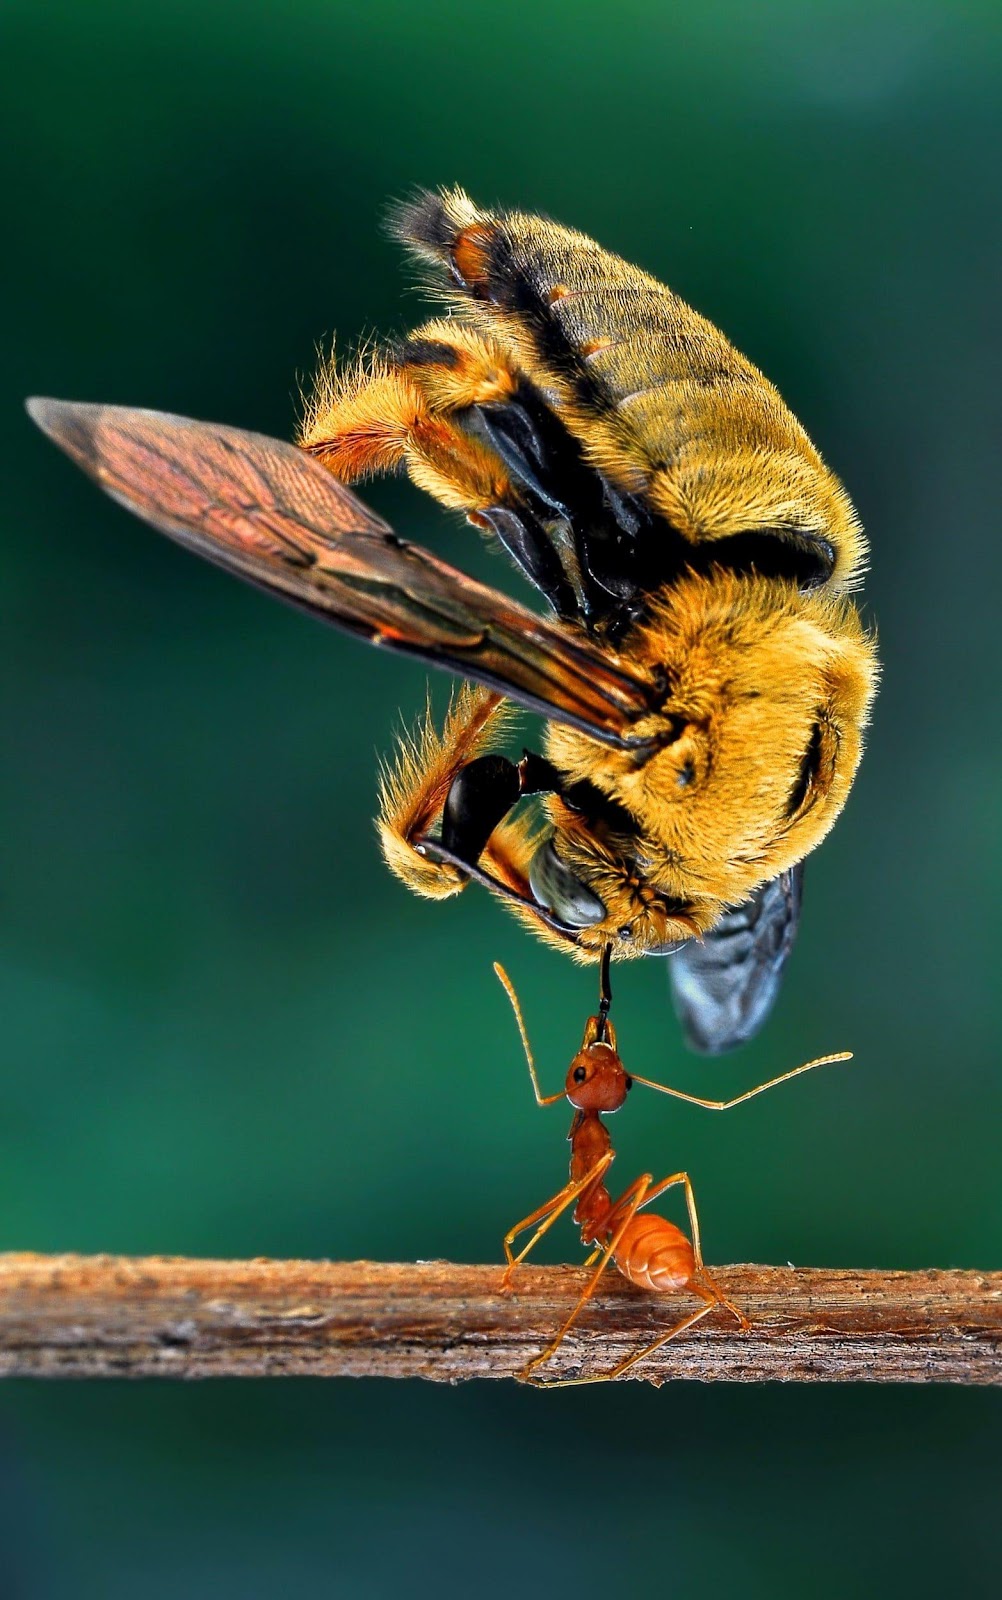 A weaver ant balanced a dead bee many times its own size in its ...